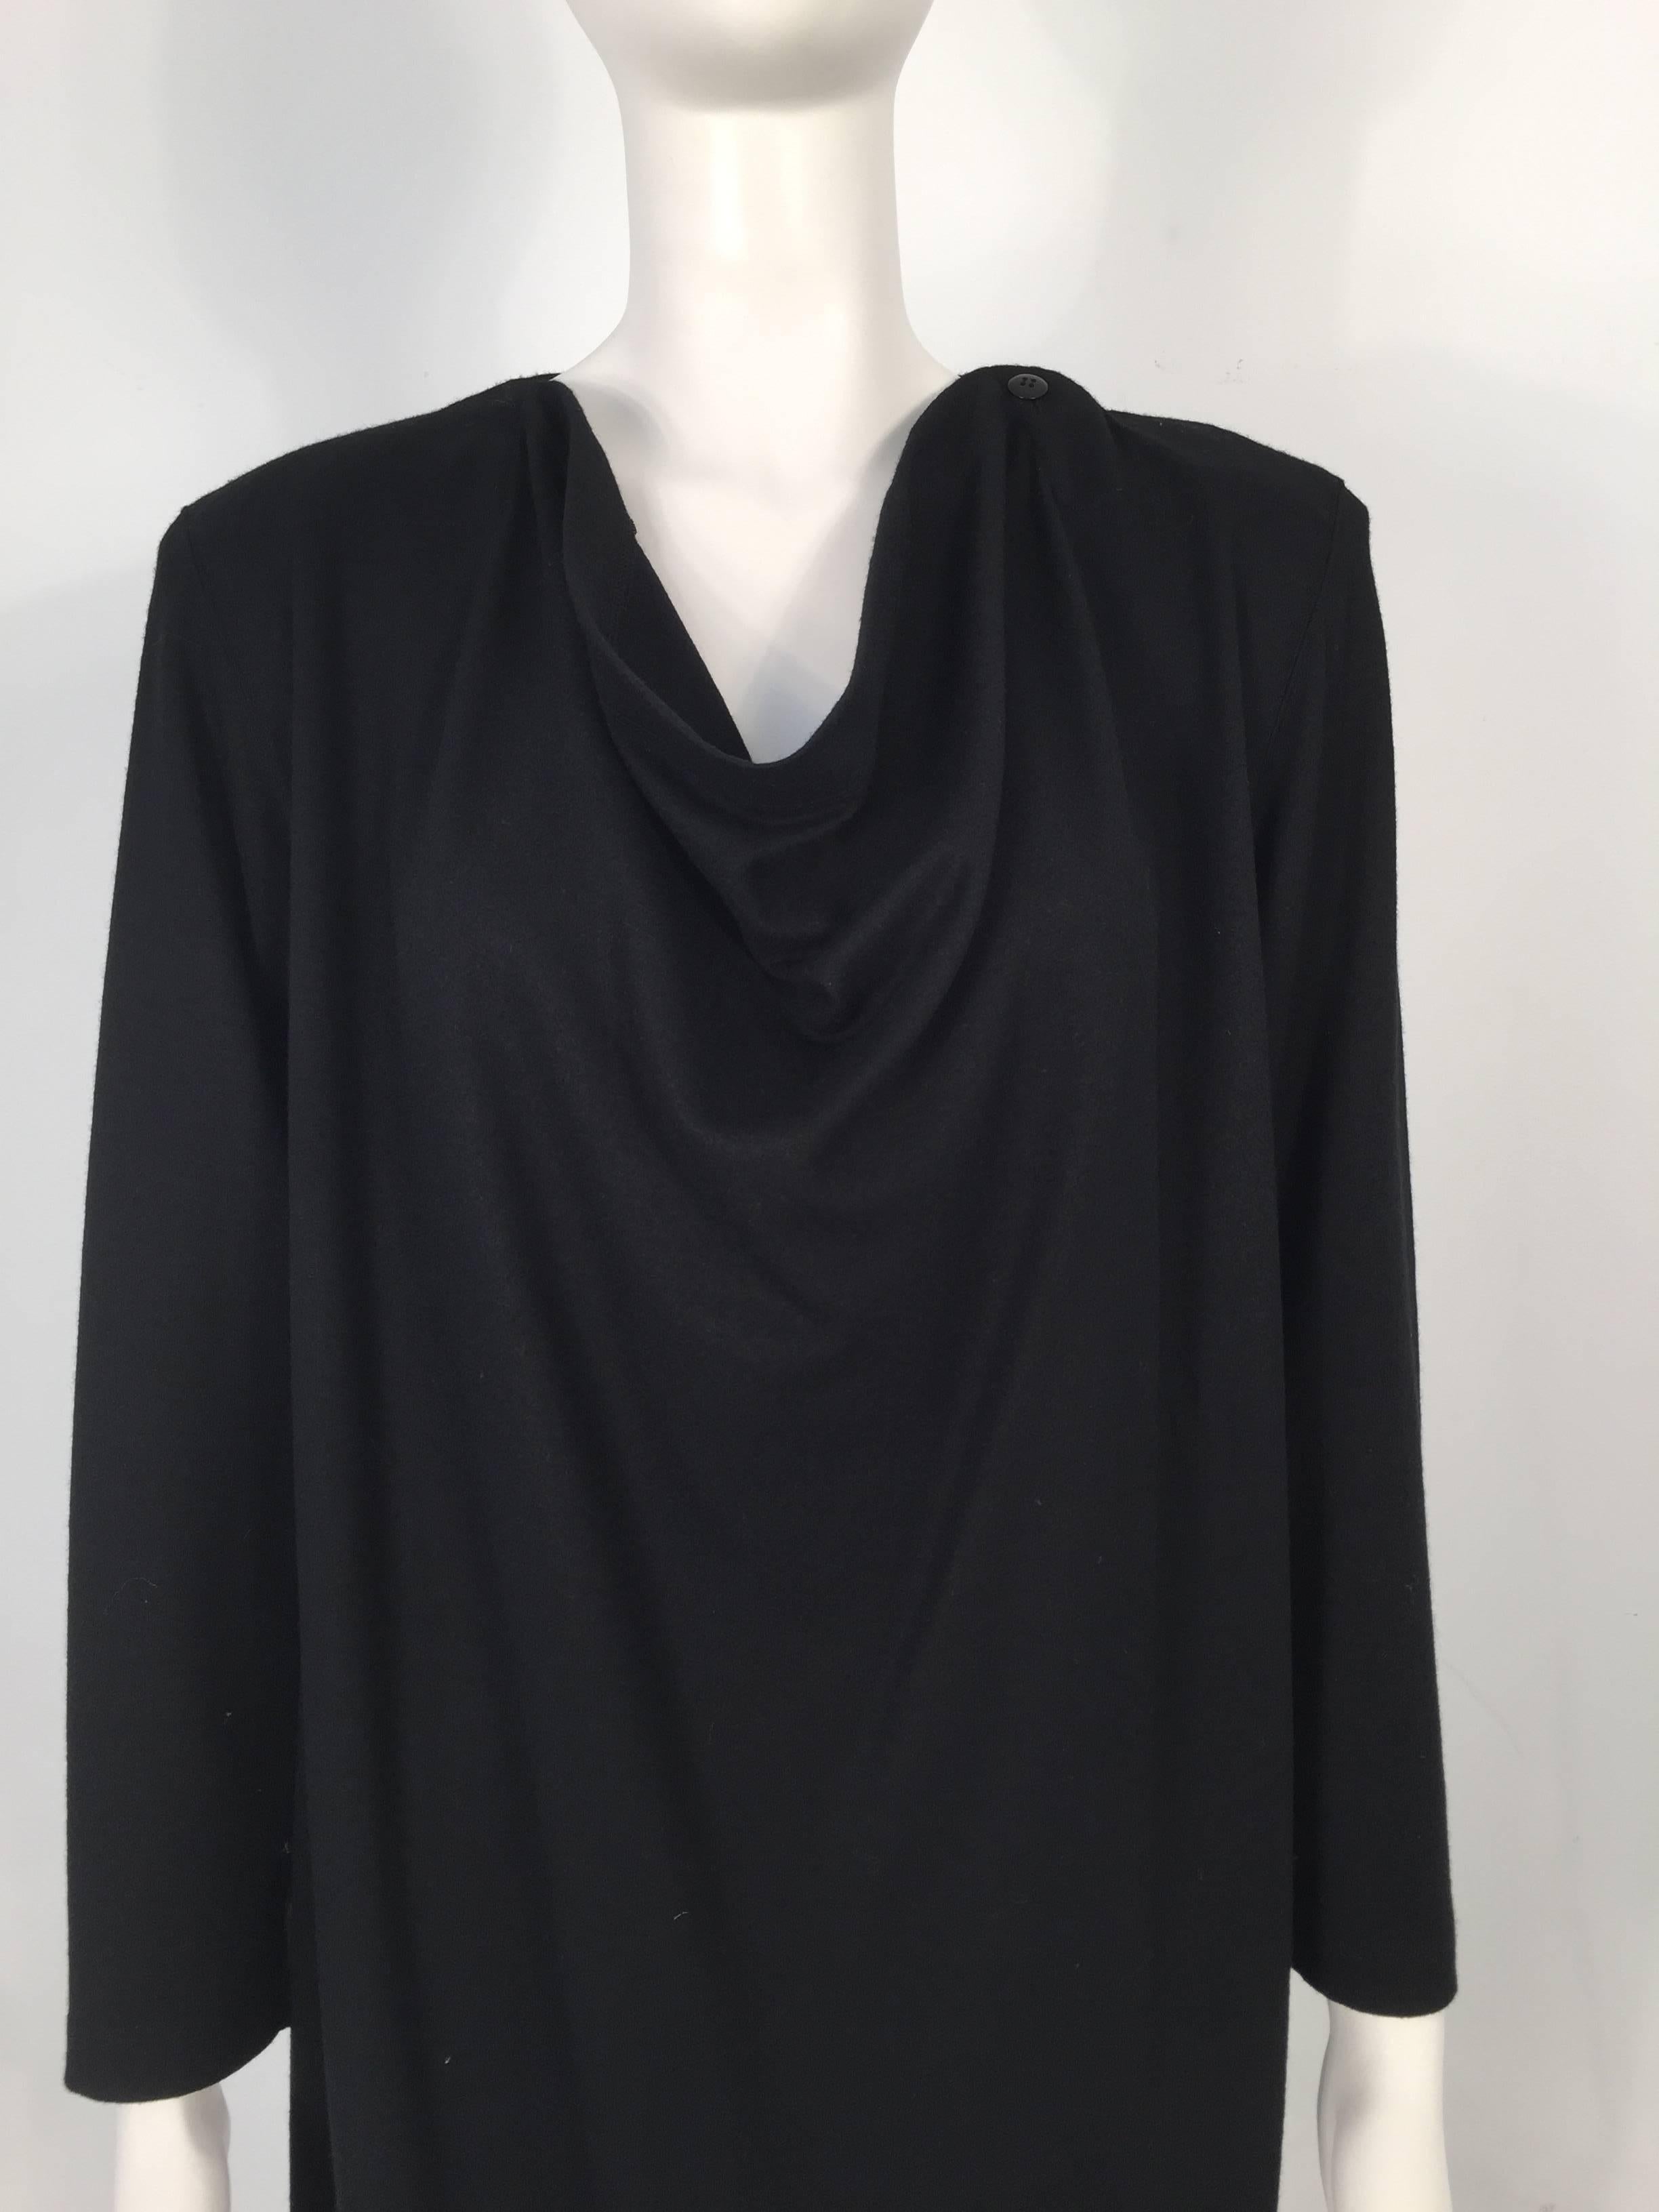 Issey Miyake 1980's black cashmere dress features a brass zipper on the back and a futuristic cut.

Measurements: Sleeves:  23''; Zipper: 19''; Slit: 12''

For International orders, please contact us for a shipping quote.